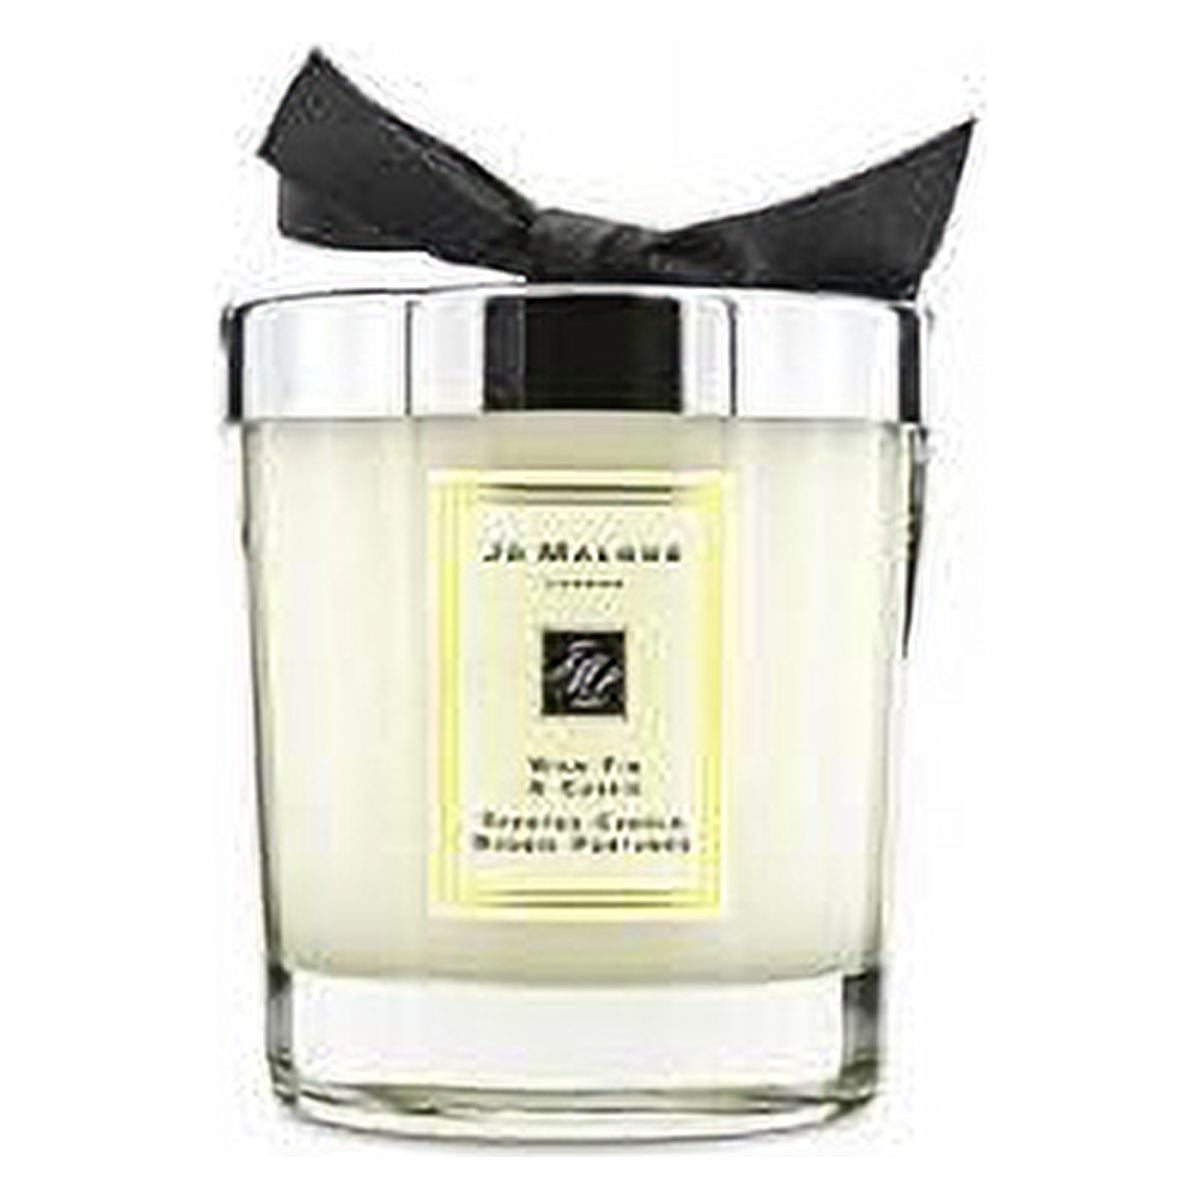 Jo Malone 'Wild Fig & Cassis' Scented Home Candle 7 oz. - Walmart.com